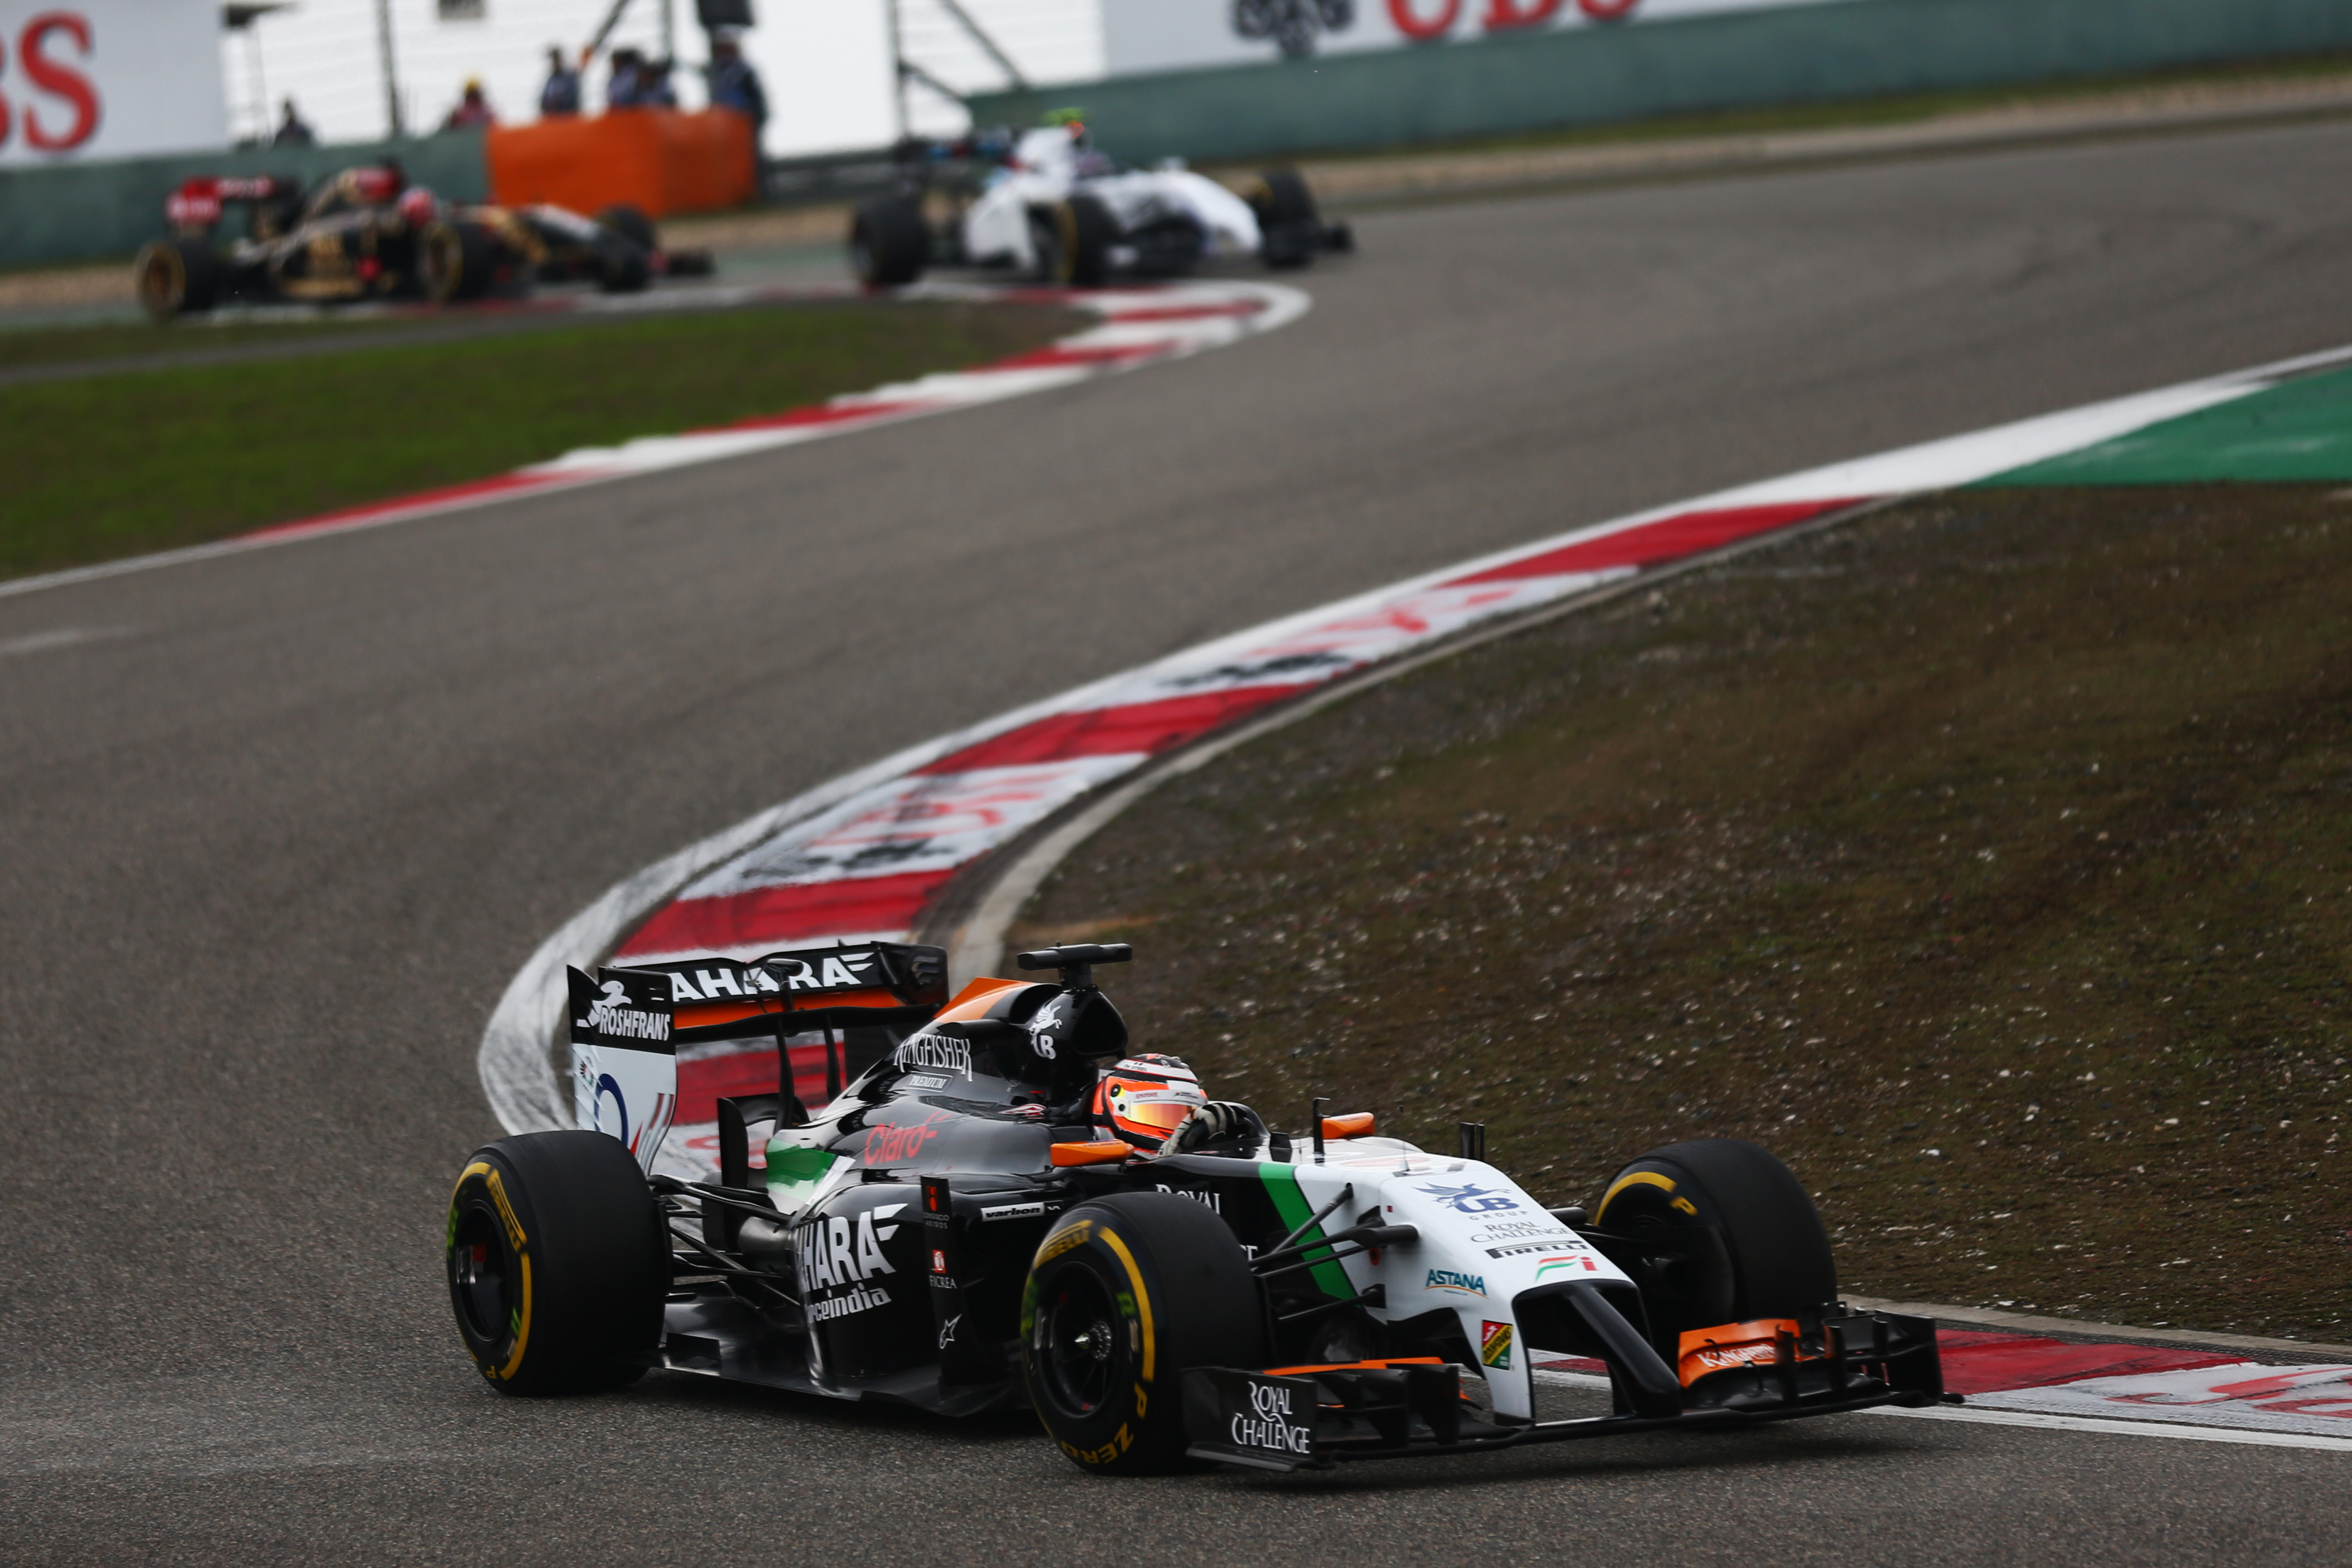 Force India: ‘Sterk optreden in Bahrein én China hoopgevend’